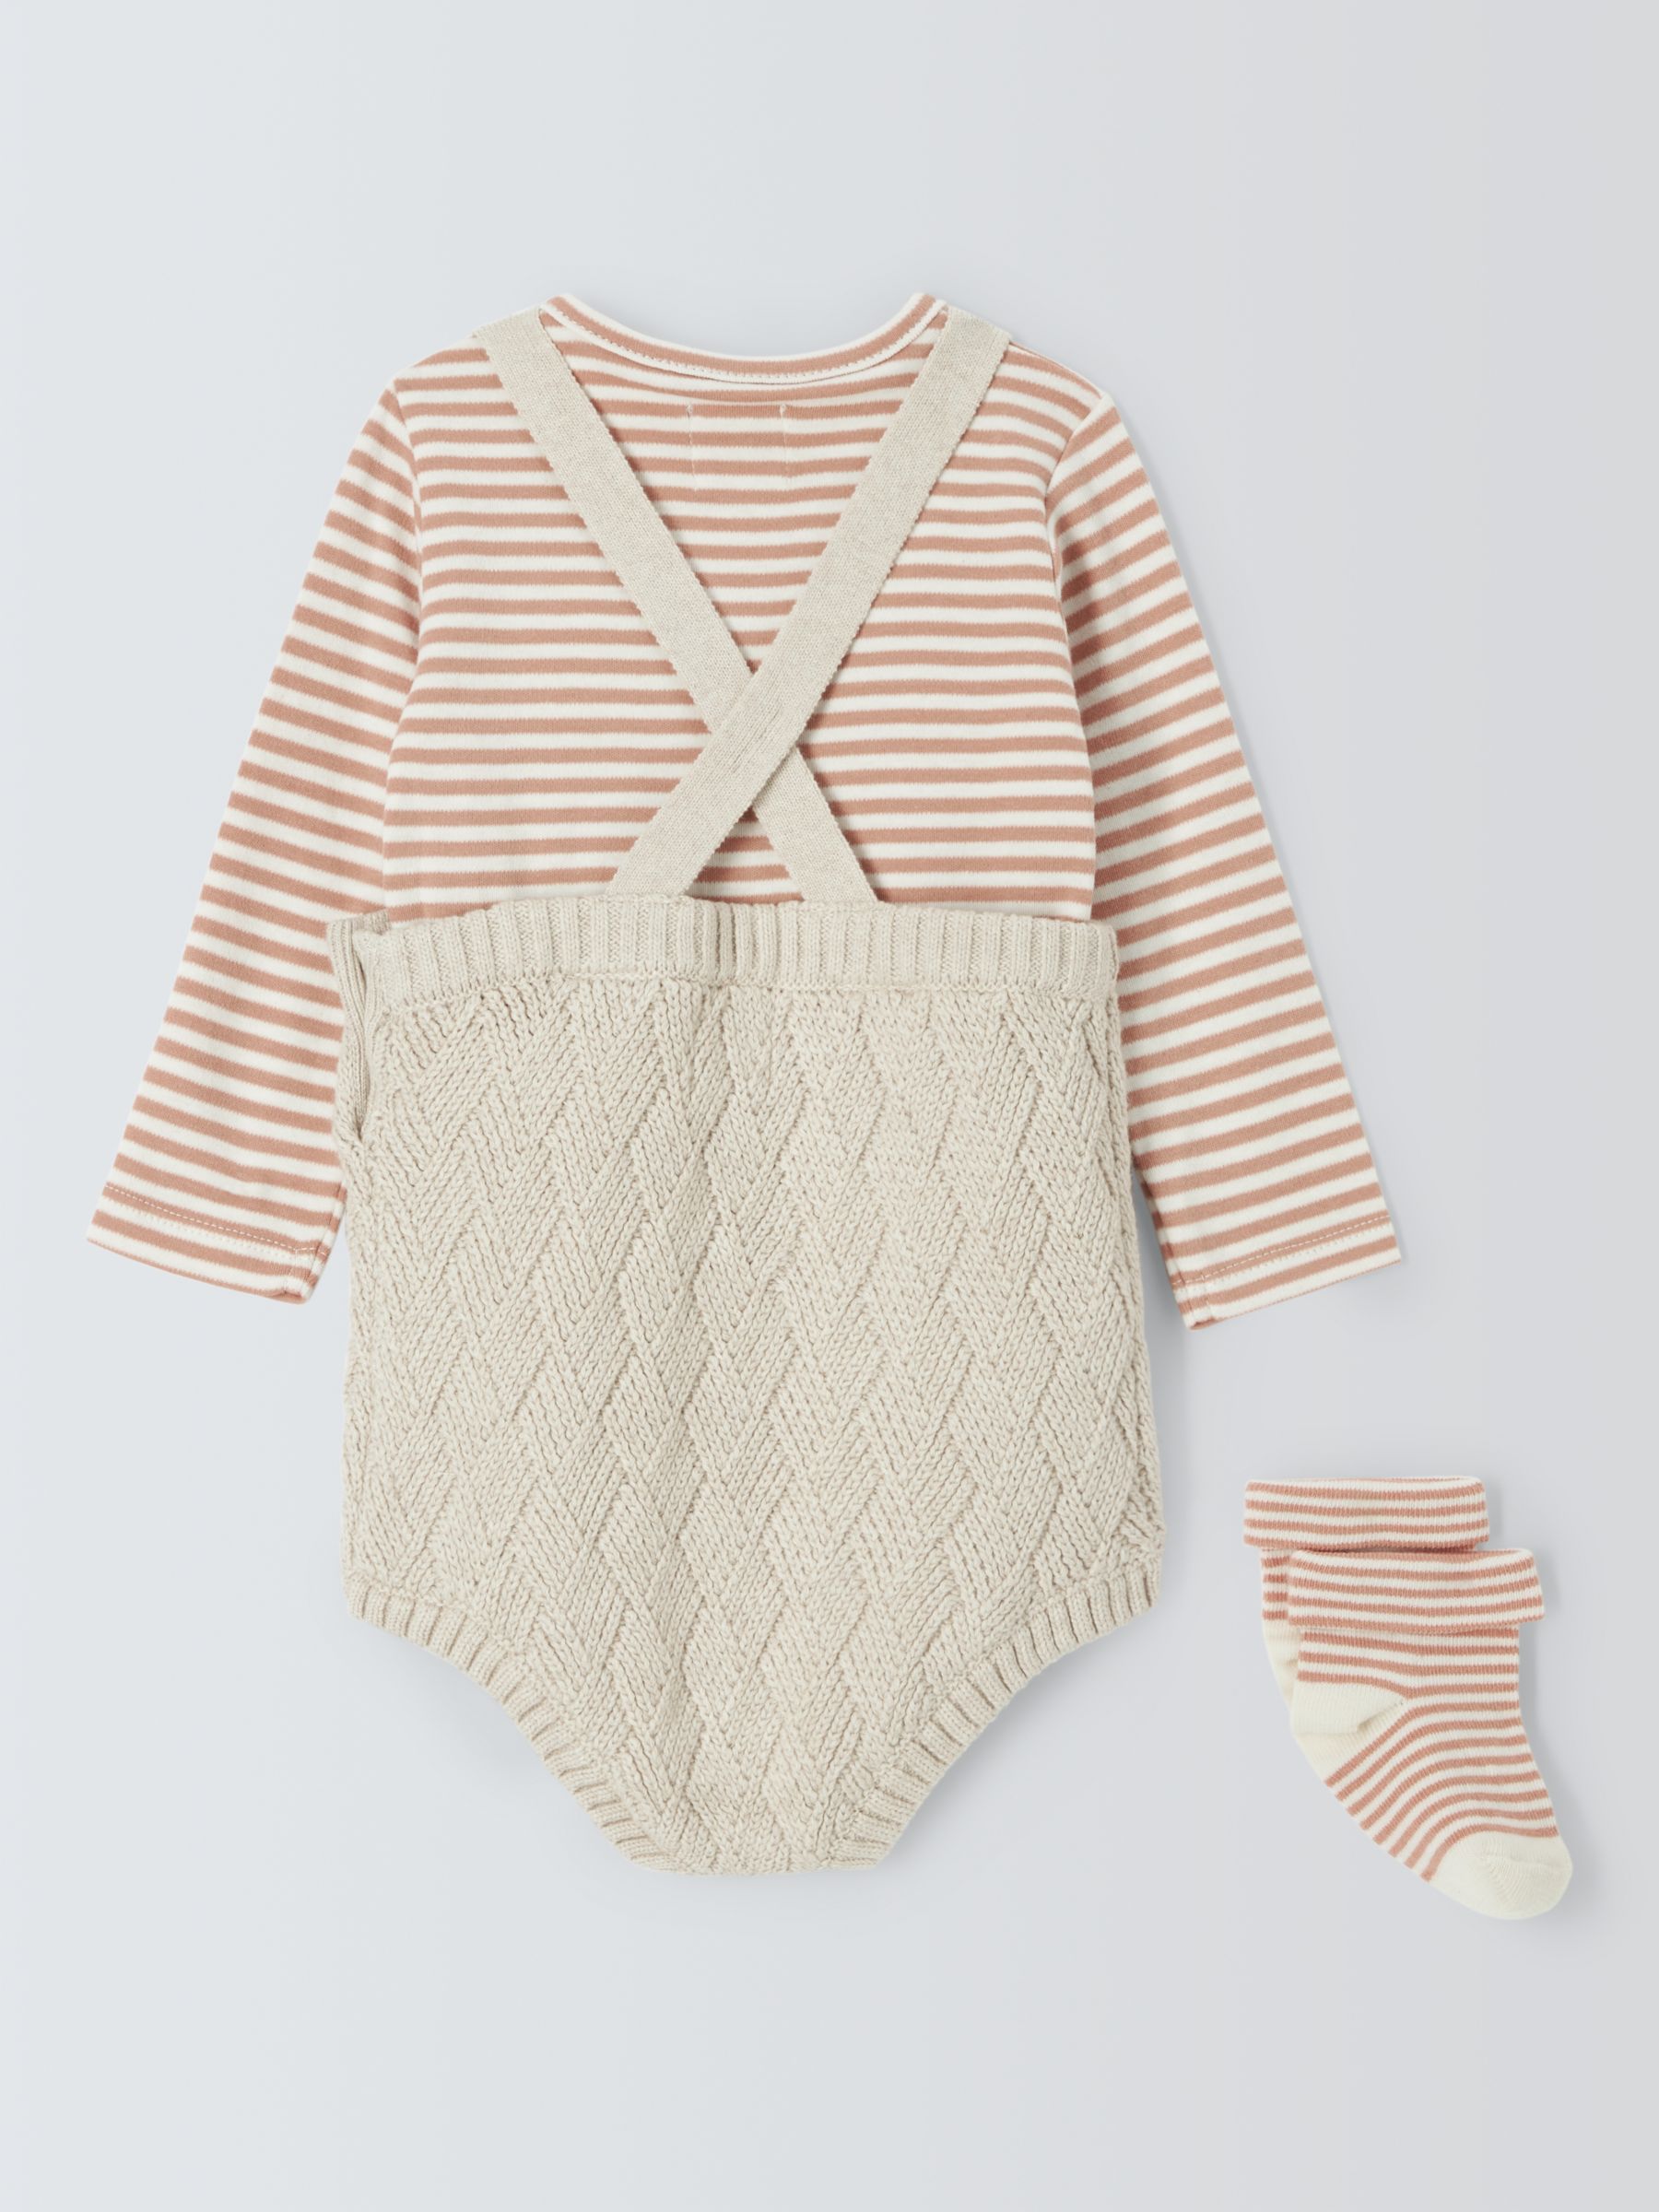 John Lewis Baby Knitted Dungaree Bodysuit, T-Shirt and Socks Set, Neutrals, 6-9 months